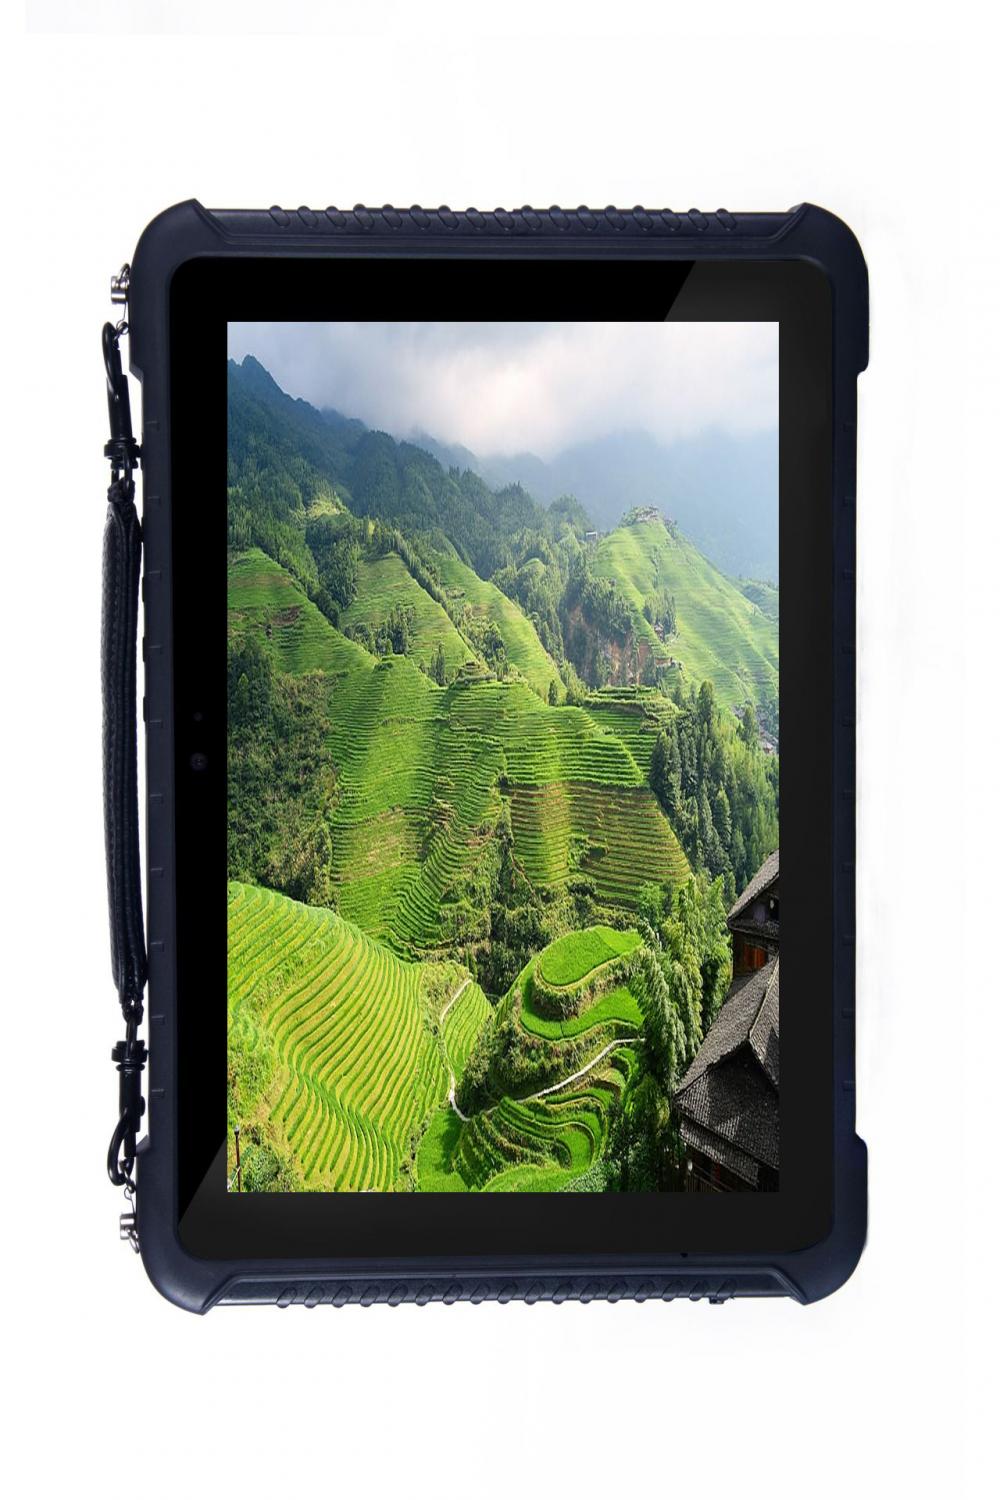 Rugged Tablet Android Full HD Display